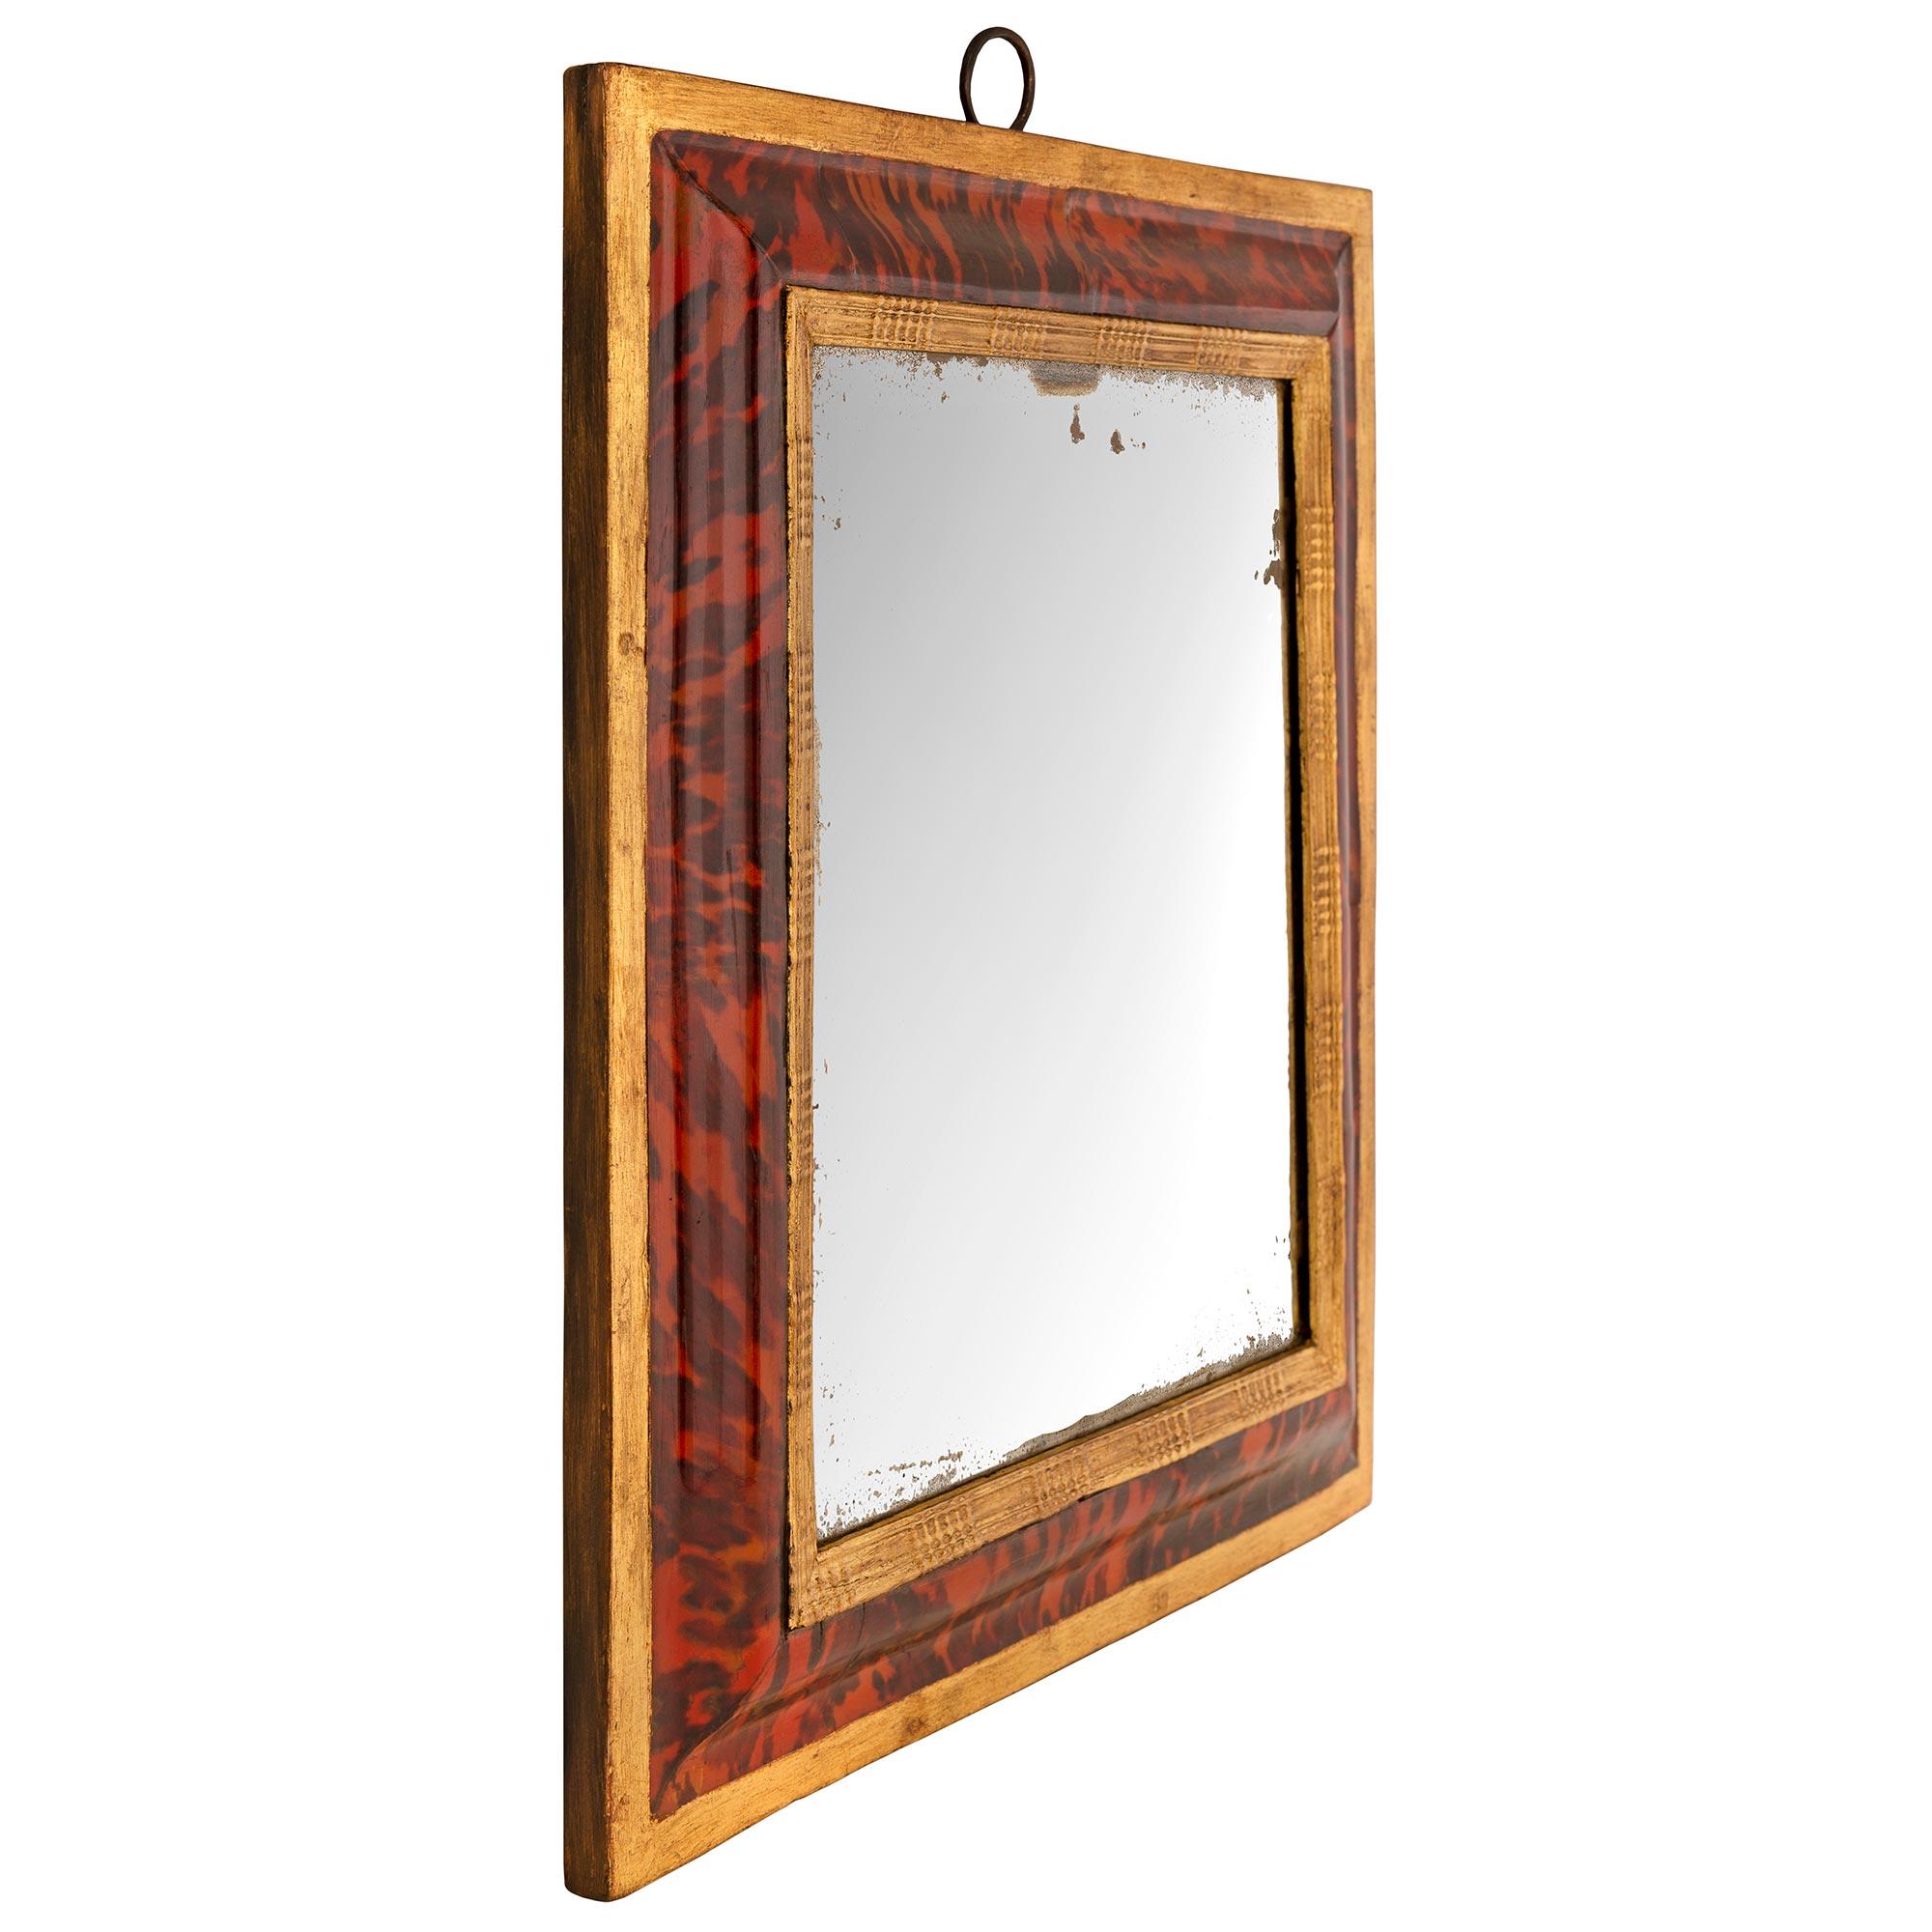 A striking Continental 18th century Tortoiseshell and giltwood mirror. The original mirror plate is set within a beautiful mottled giltwood border with a fine tortoiseshell frame with an elegant giltwood band. All original gilt and mirror plate